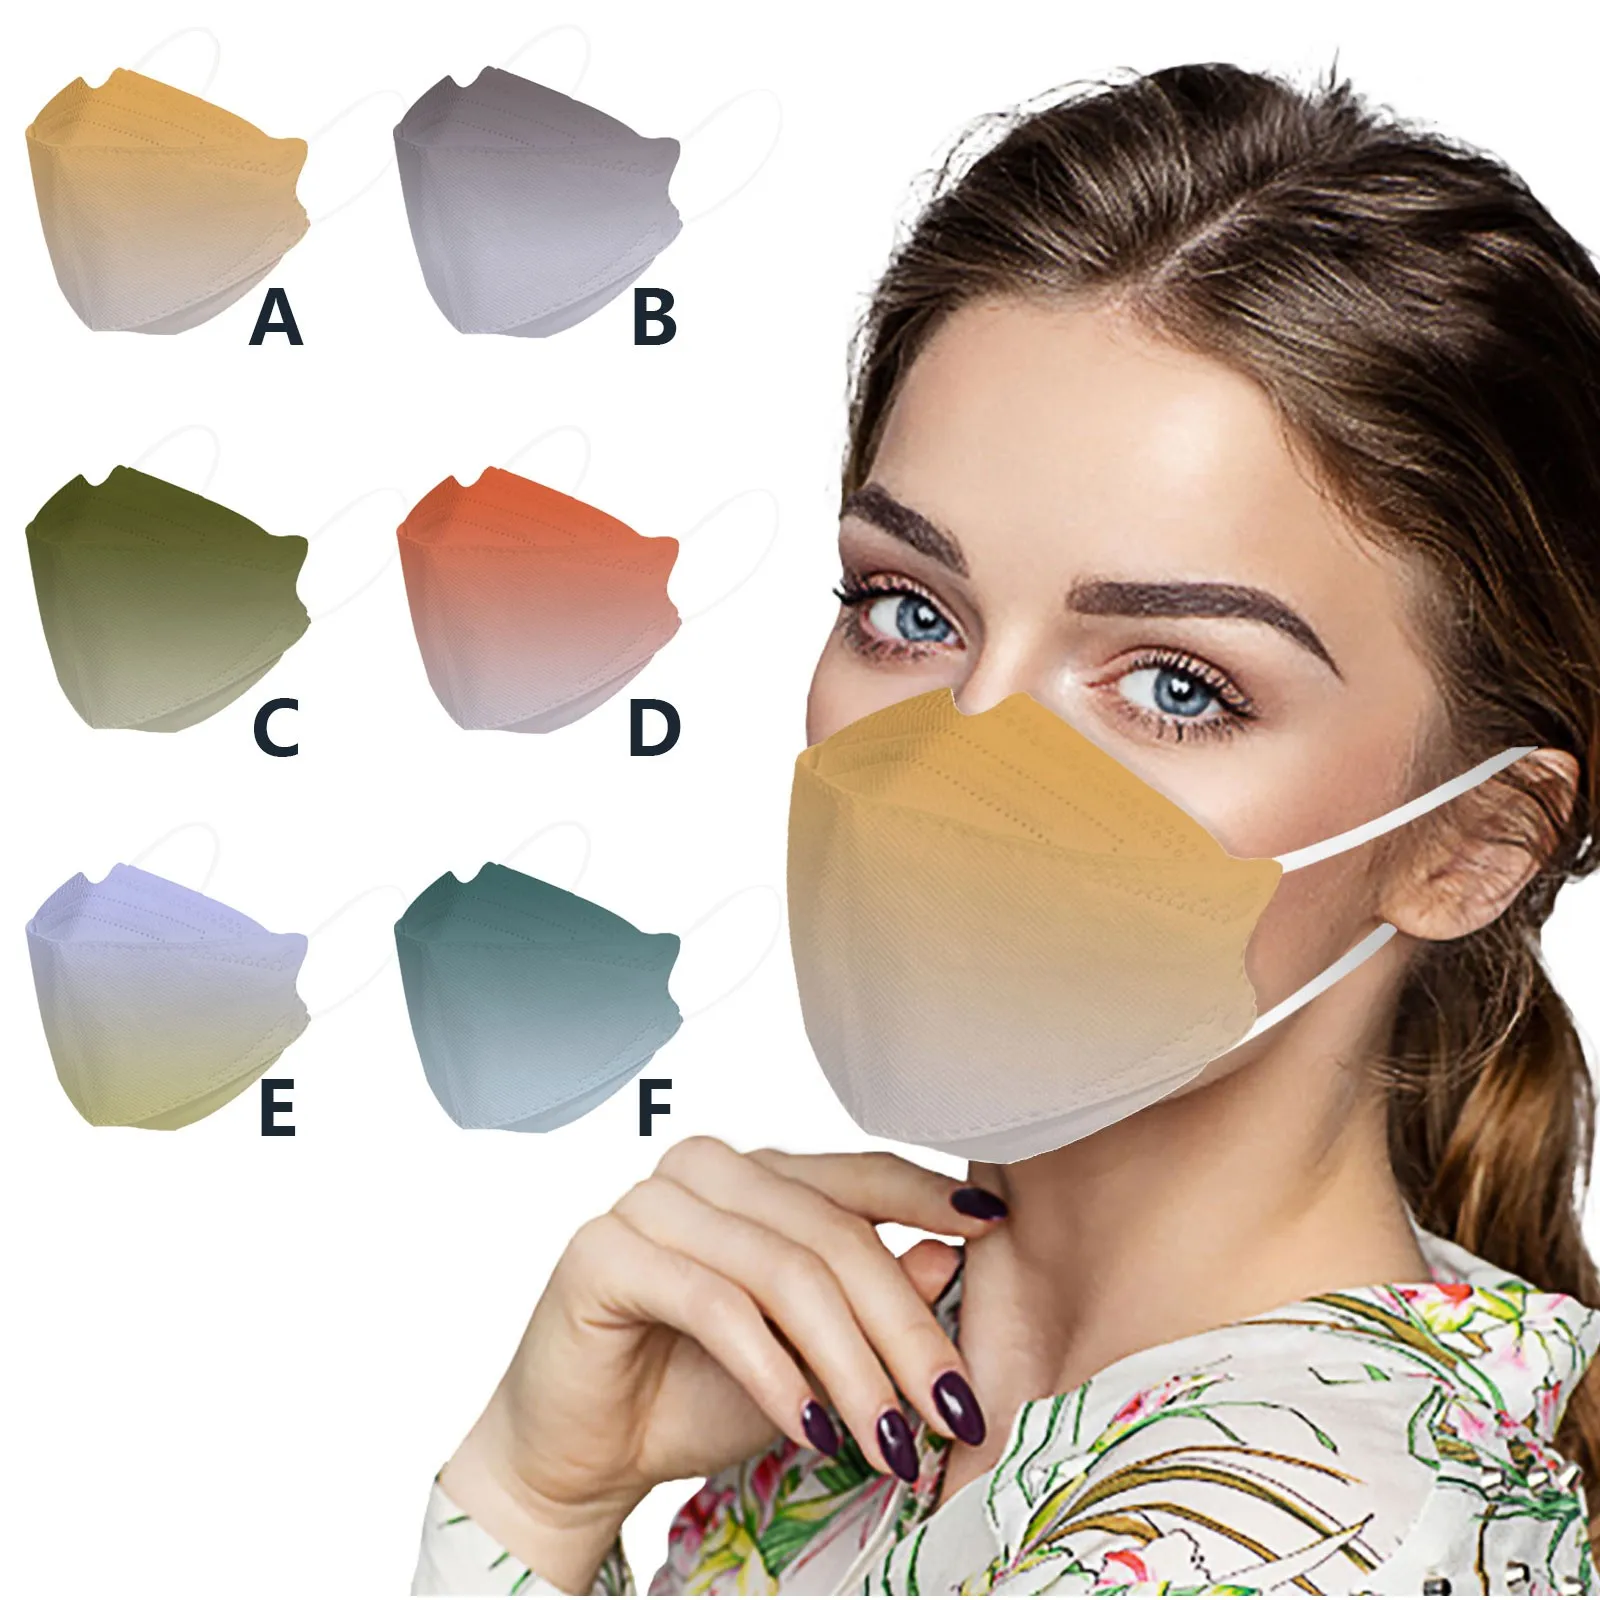 

10pcs 4D Gradient Protective And Safety Mask For Adult 4-layer Filter rotec 3ply Mask For Unisex Pm2.5 Masks Earloop Bandage